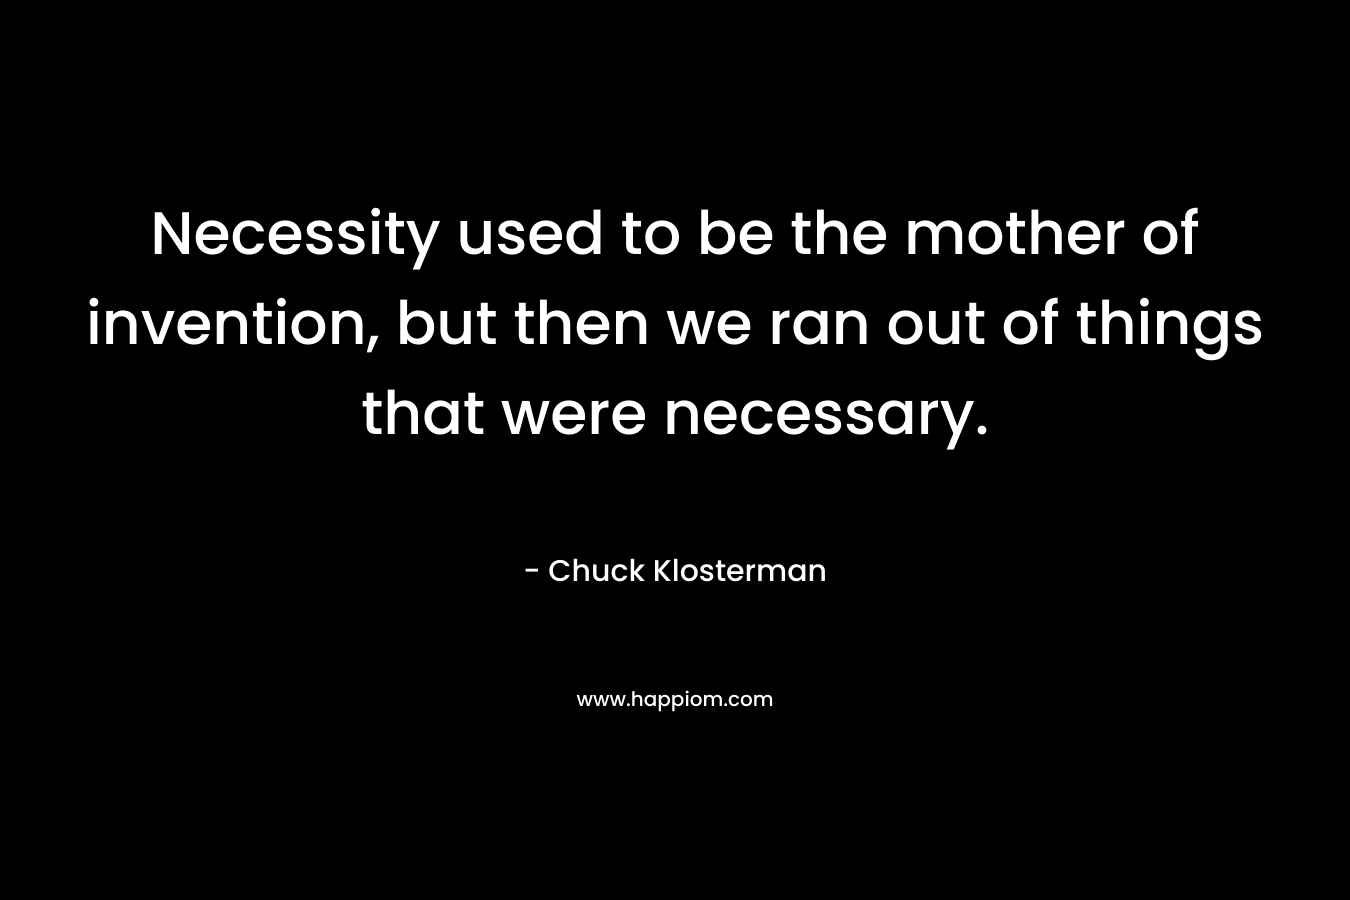 Necessity used to be the mother of invention, but then we ran out of things that were necessary. – Chuck Klosterman